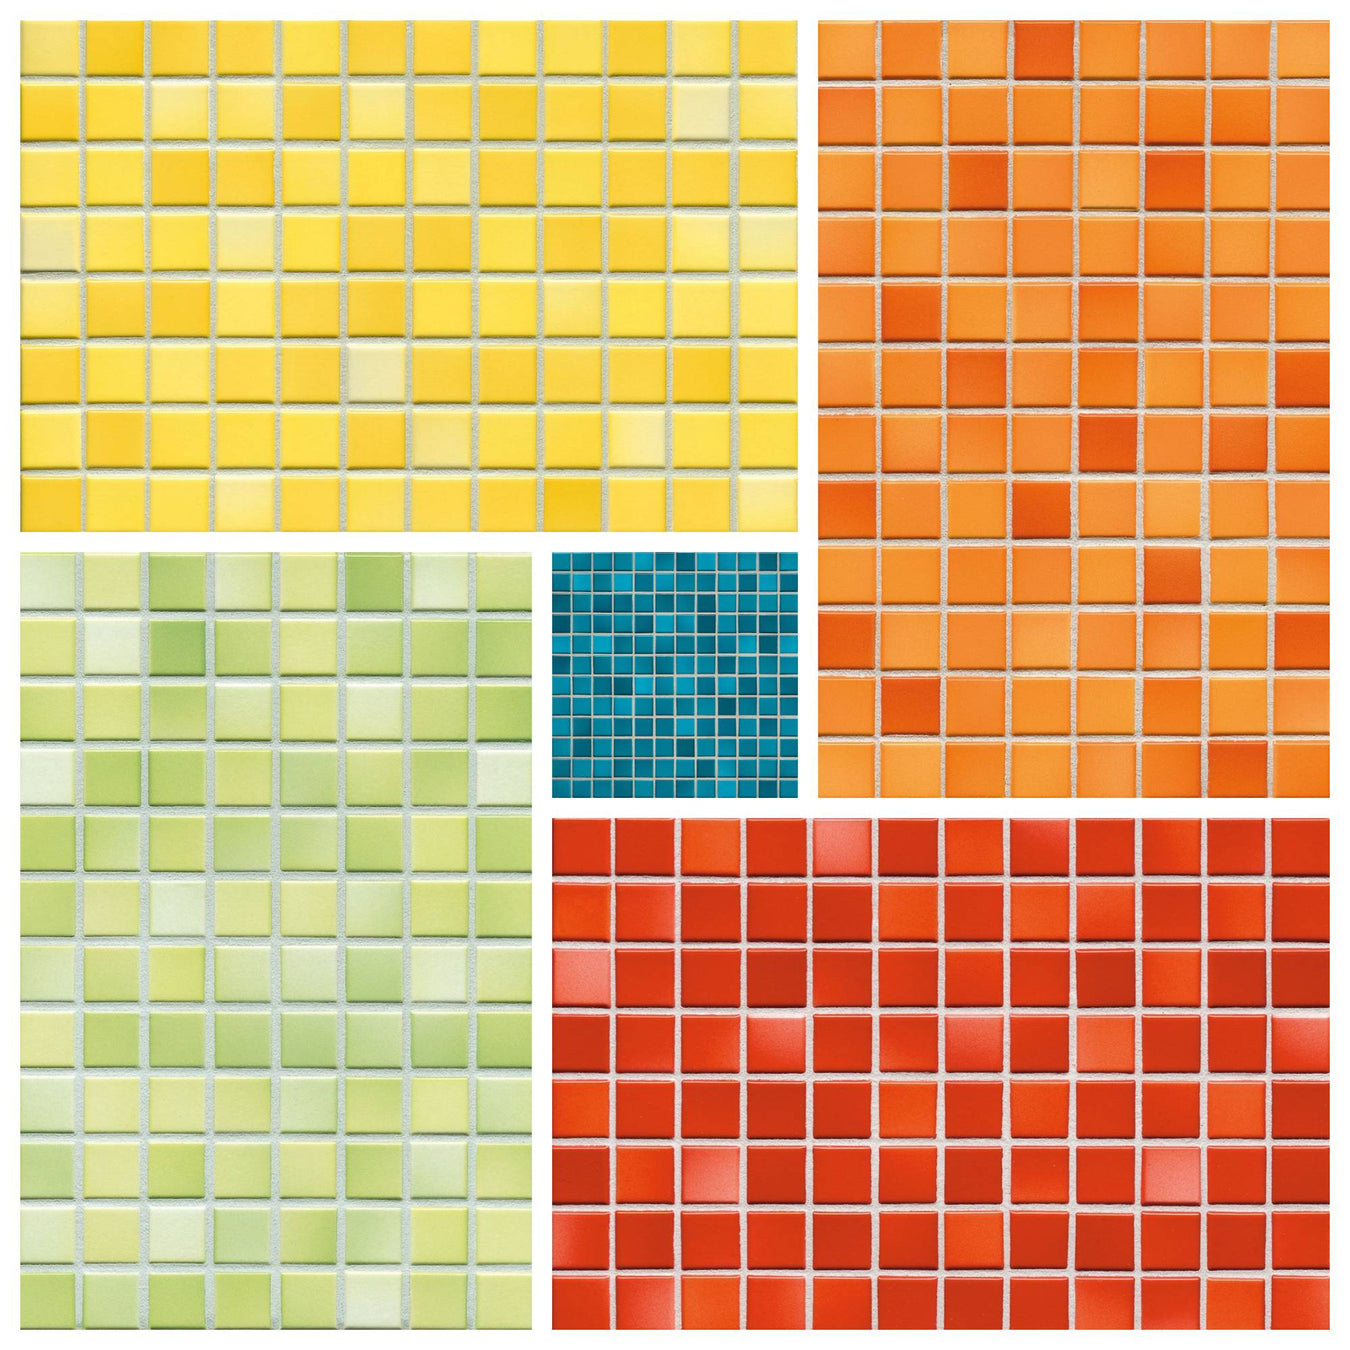 Mediterranean Mosaic porcelain ceramic tile updates classic midcentury style with modern colors and finishes. This collection features bright, colorful mosaic 1 inch tile for backsplash, kitchen, shower, bathroom, outdoor and pool. Matte finish options have anti-slip coating. Blue, green, yellow, orange, red, gray, black and white.